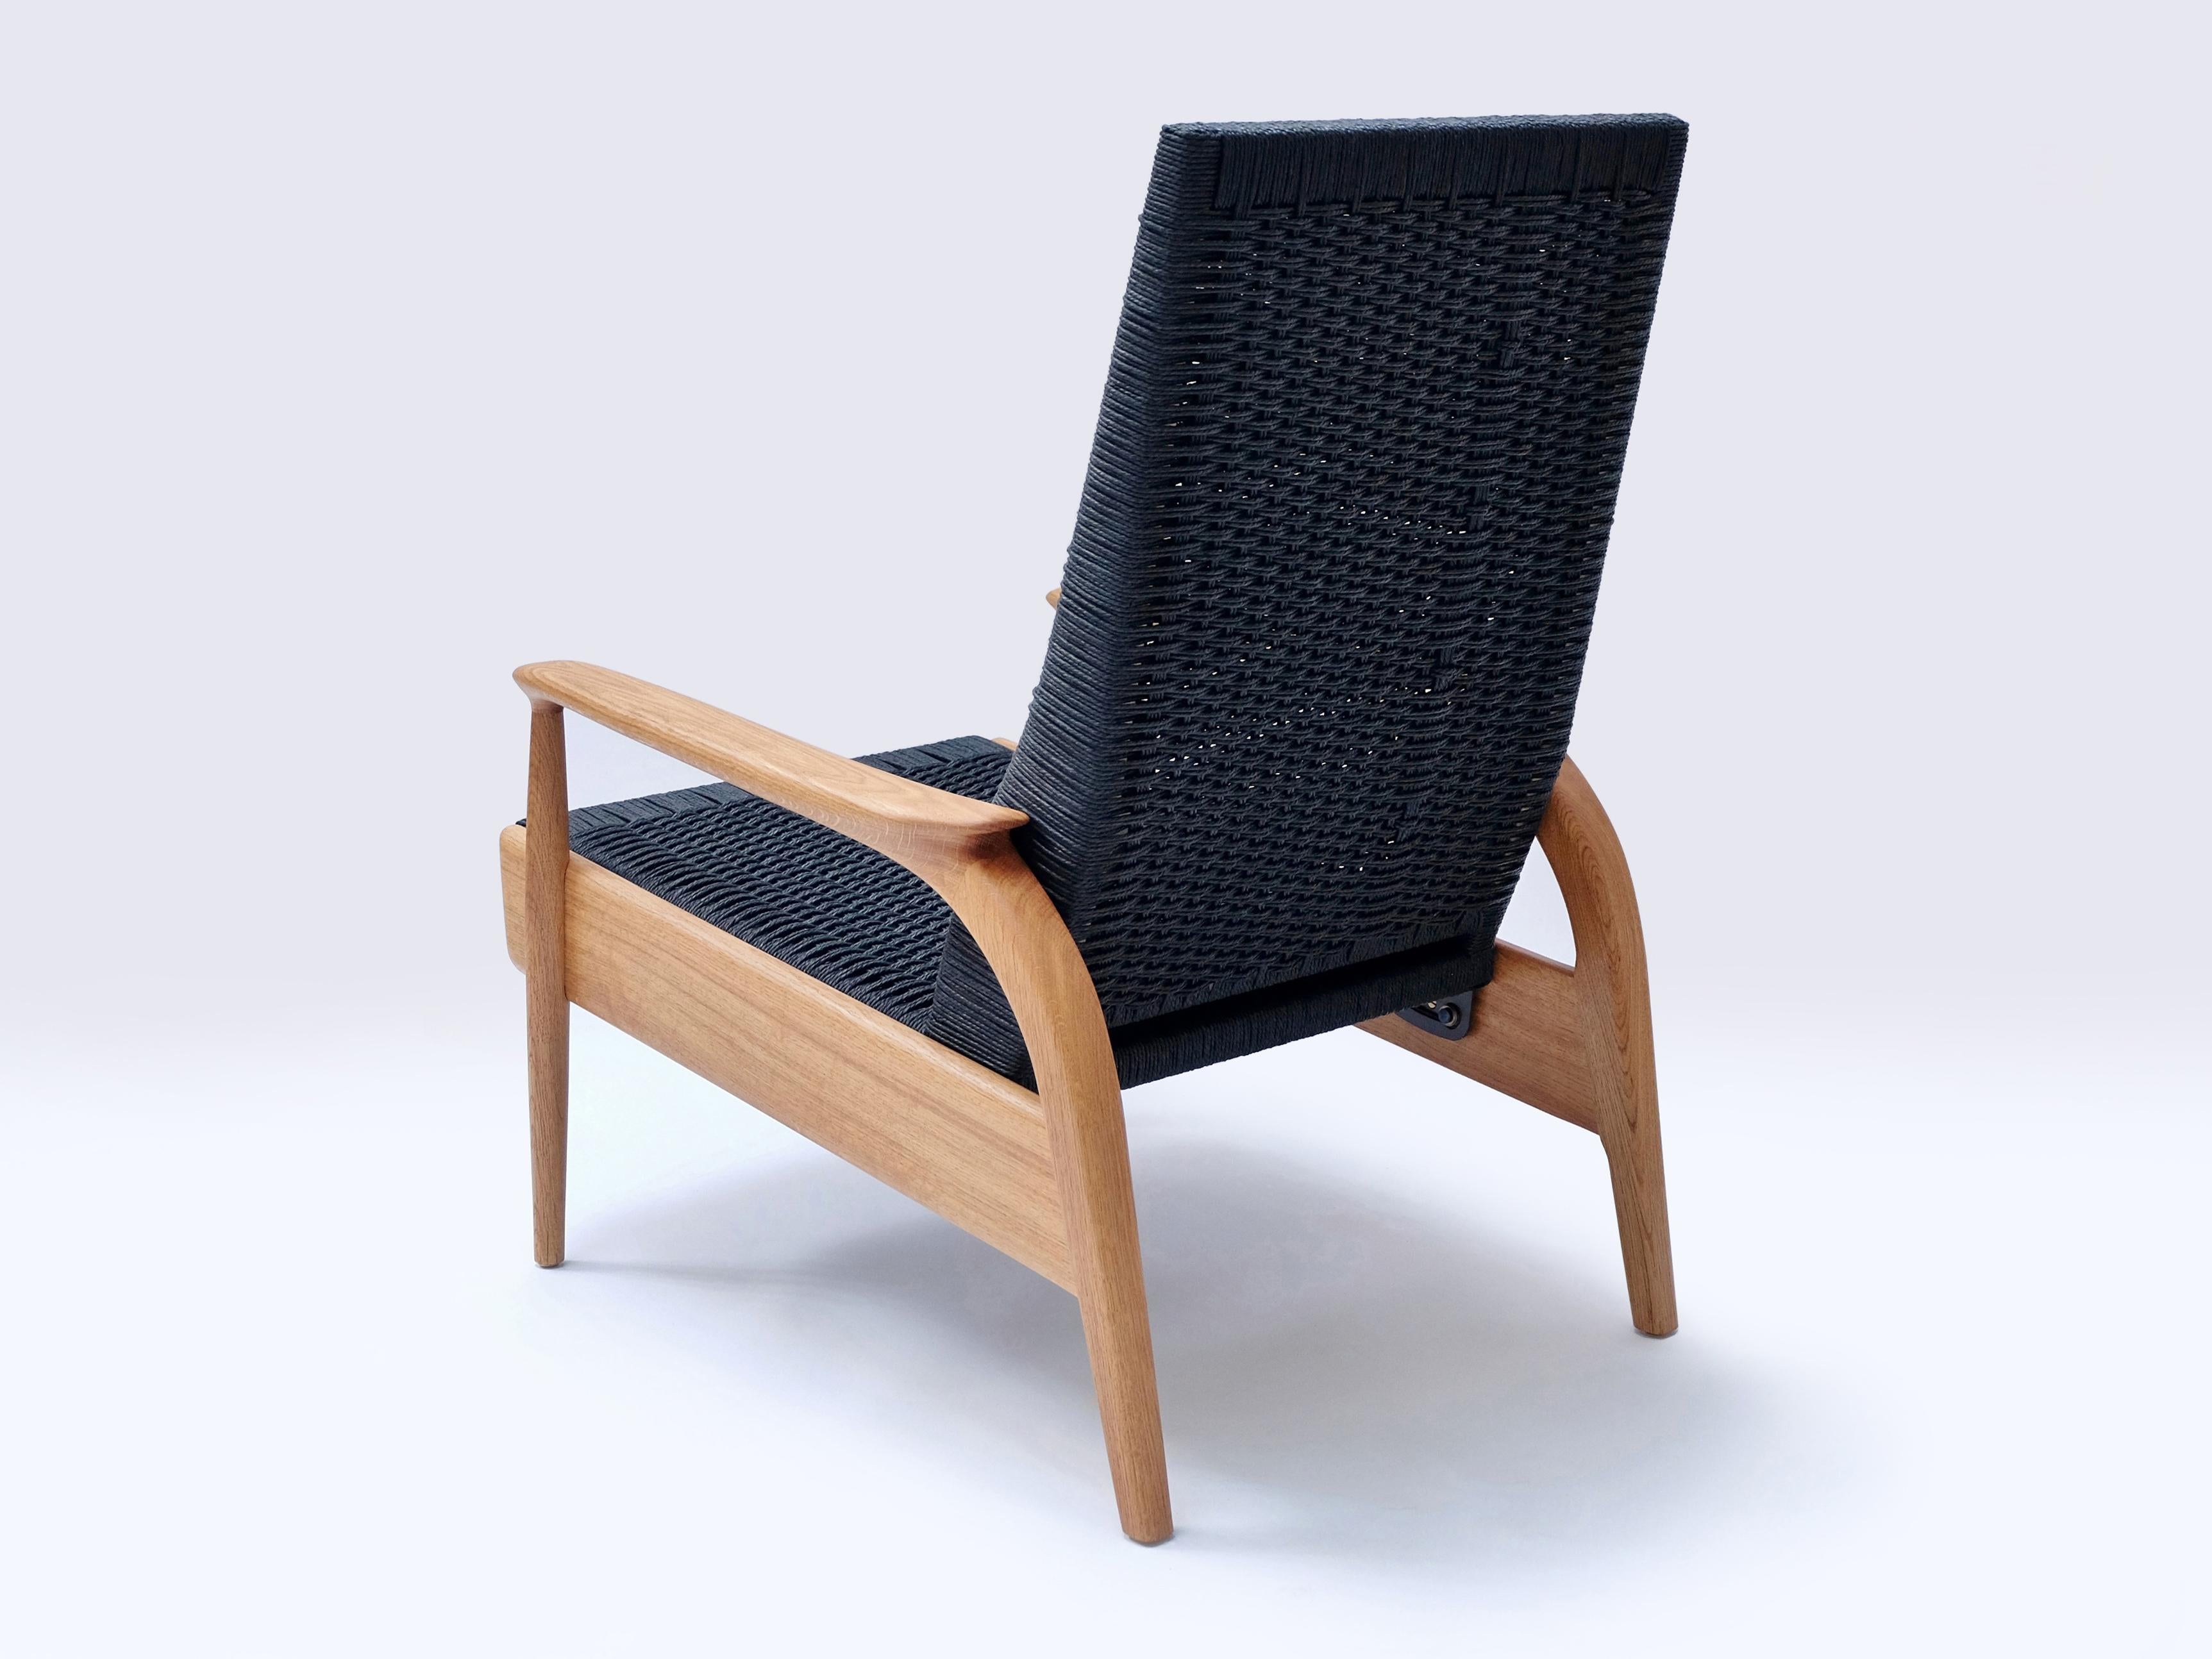 Custom-Made Handcrafted Reclining Lounge Chair in Oiled Oak& Black Danish Cord In New Condition For Sale In London, GB